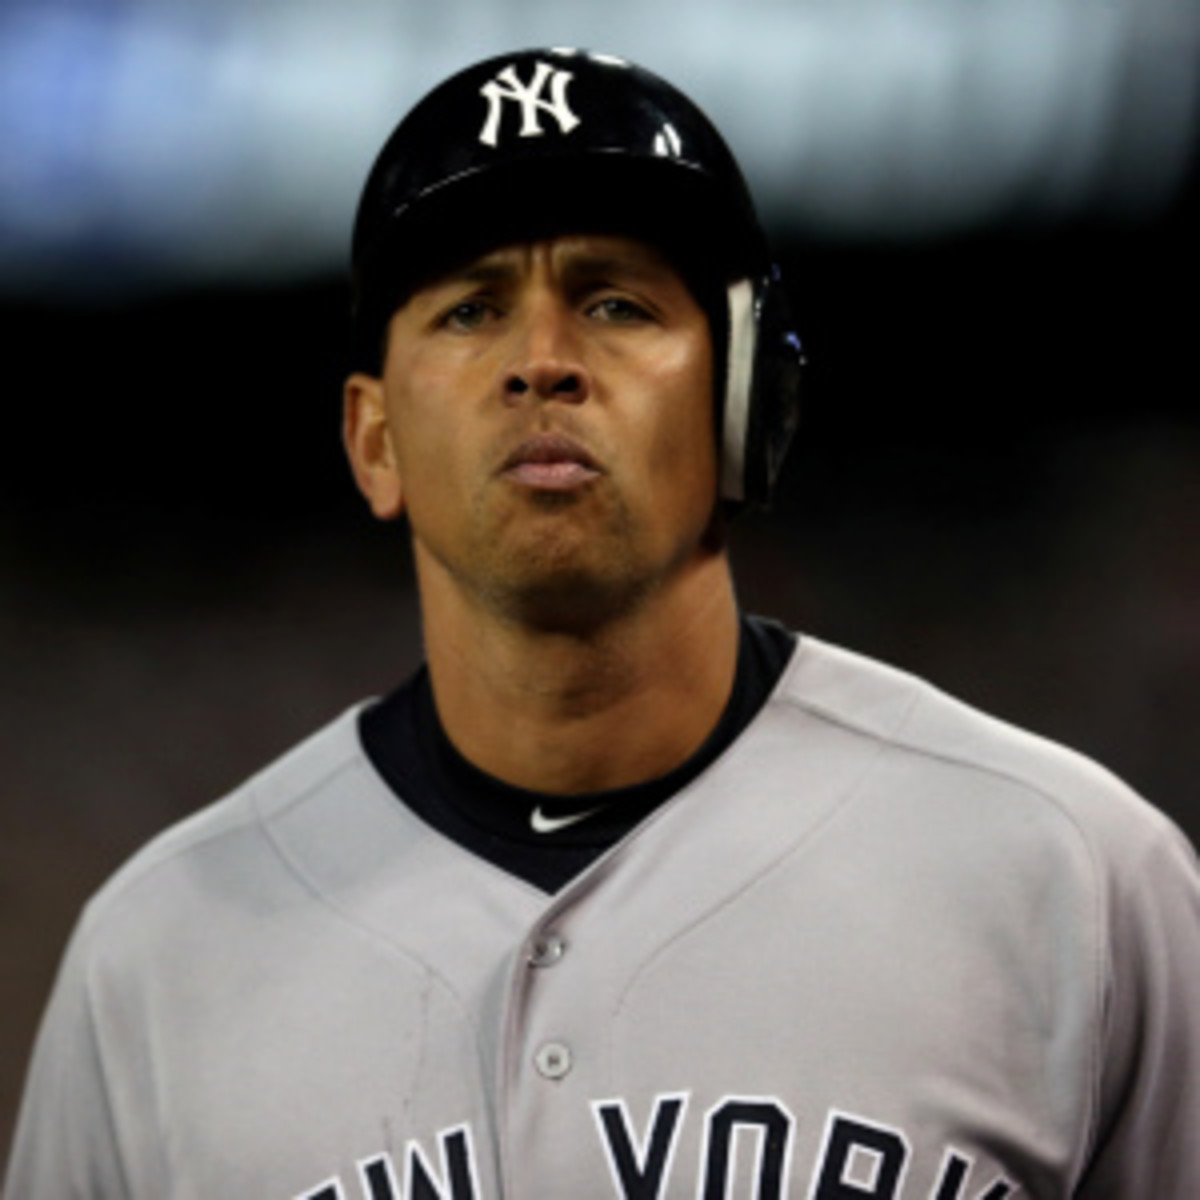 Alex Rodriguez denies recent allegations that he used PEDs. (Jonathan Daniel/Getty Images)